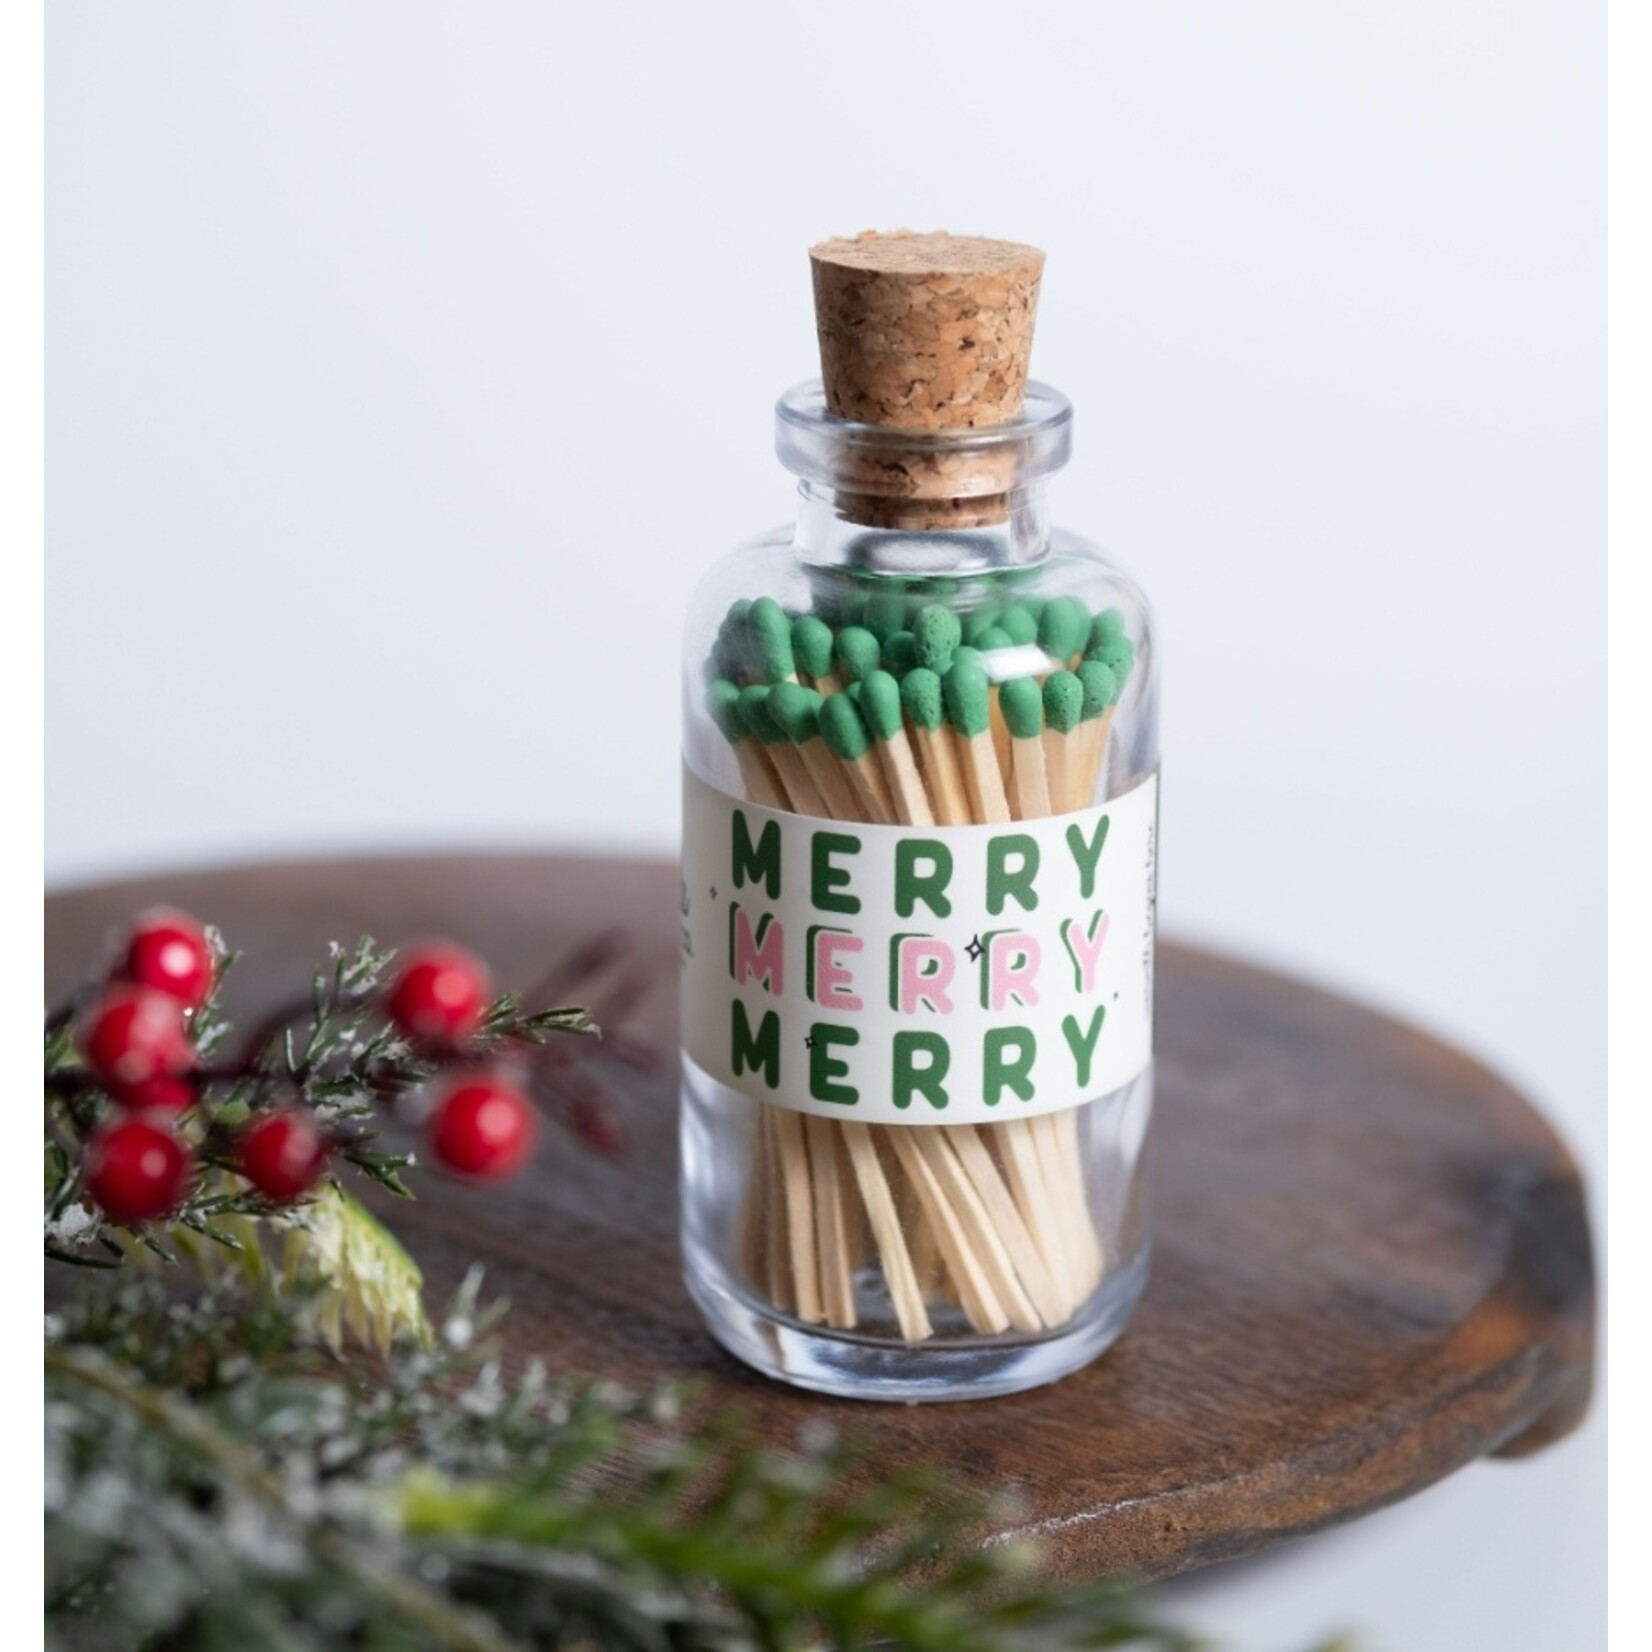 Made Market Co. Holiday Apothecary Matches